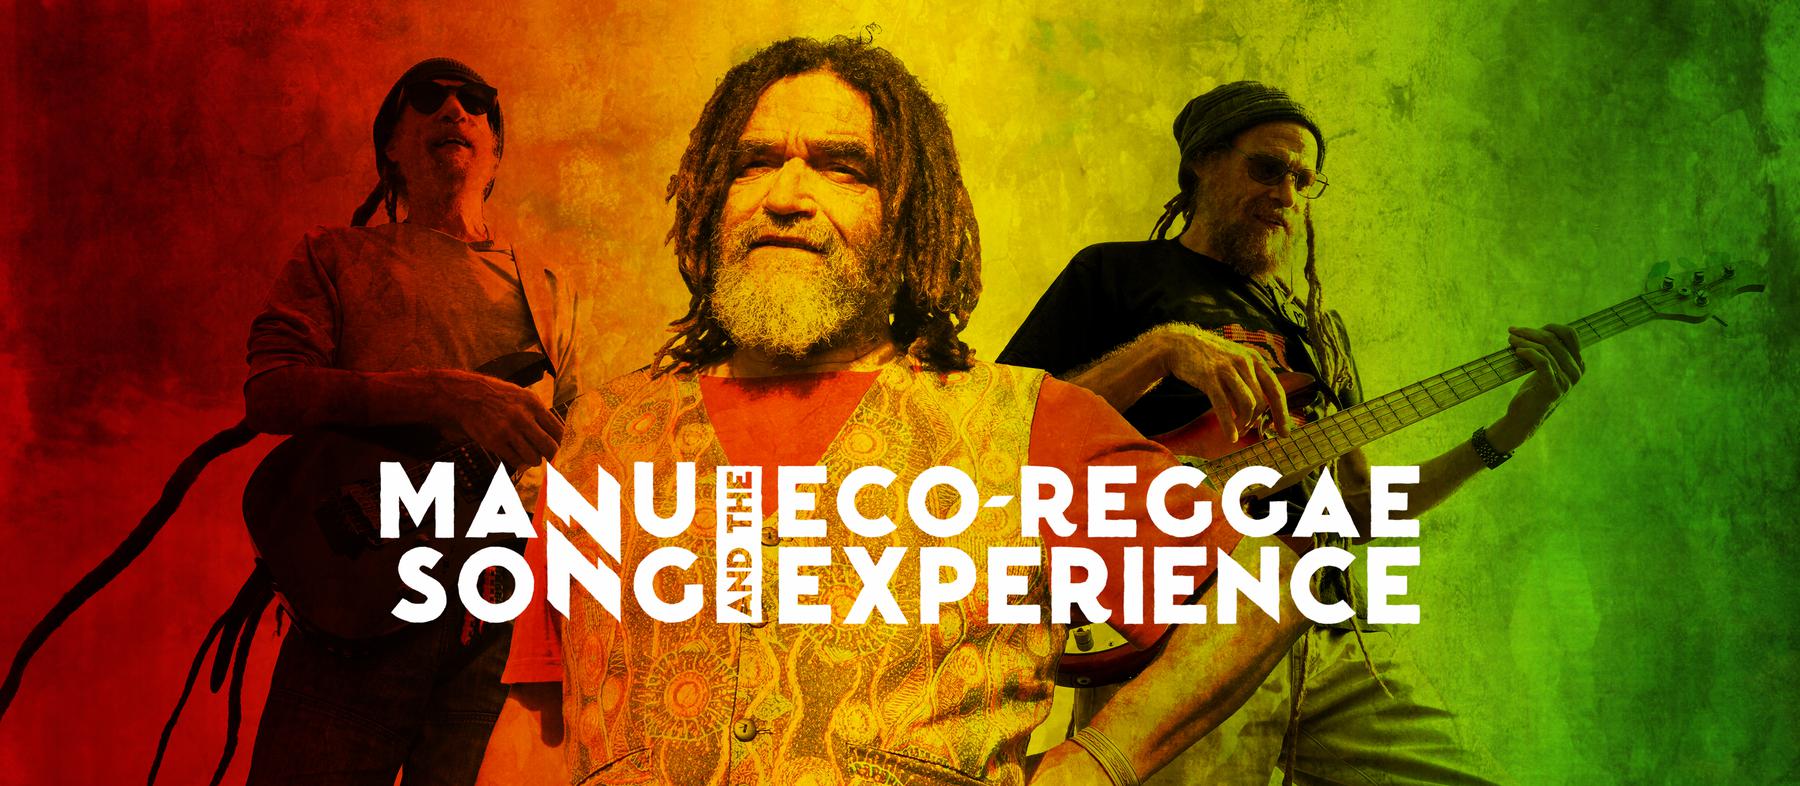 Manu Song and the Eco Reggae Experience